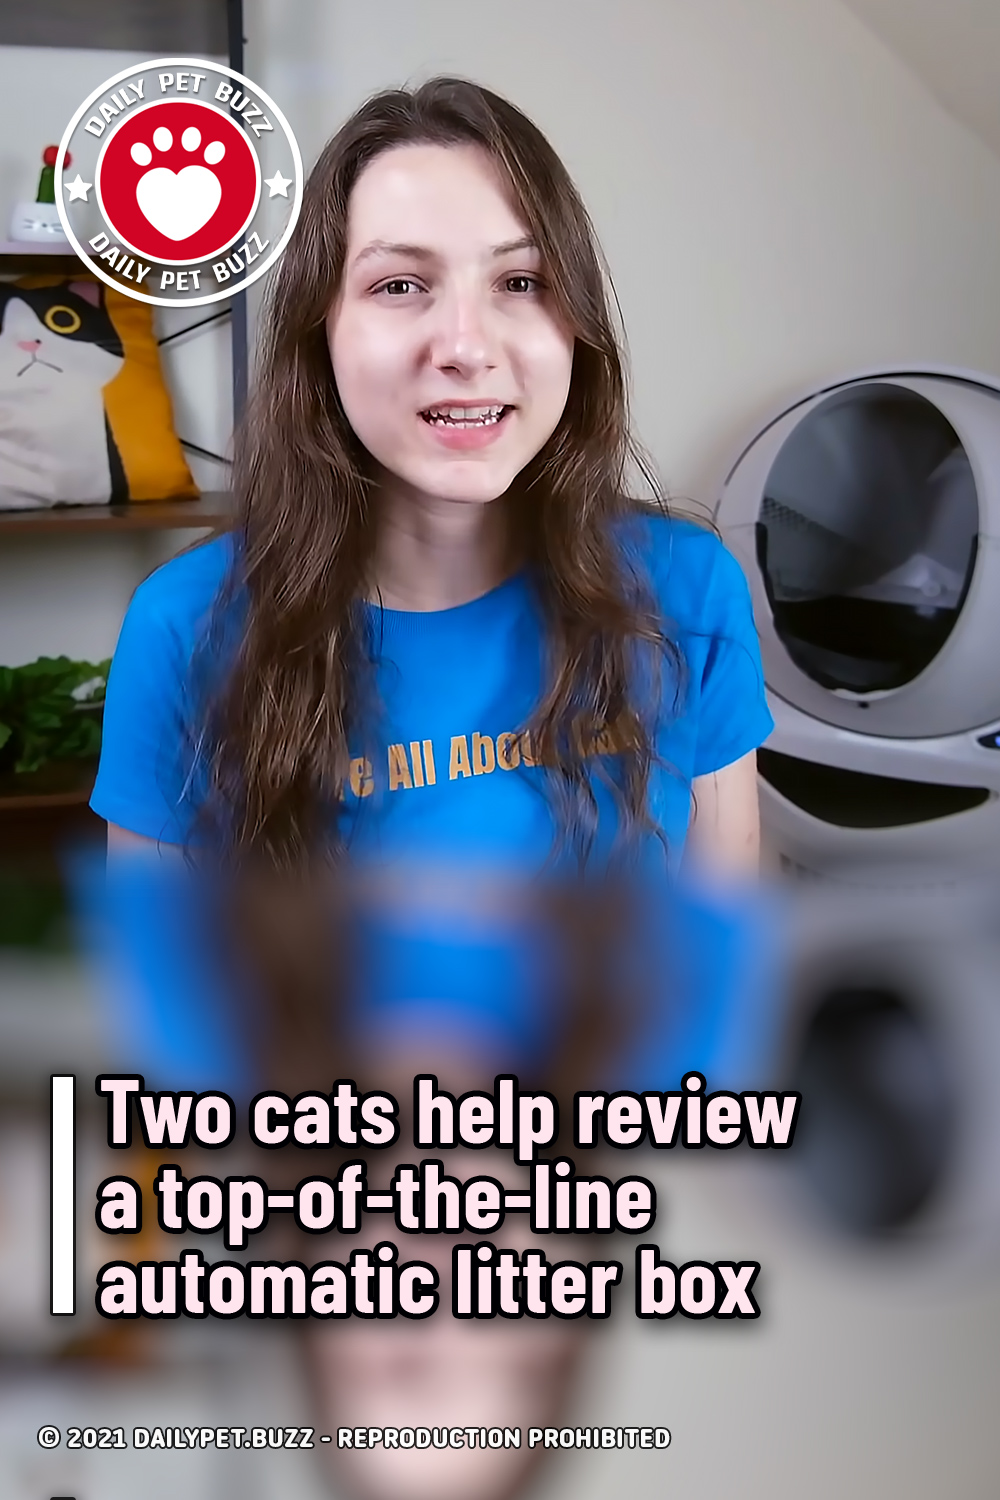 Two cats help review a top-of-the-line automatic litter box